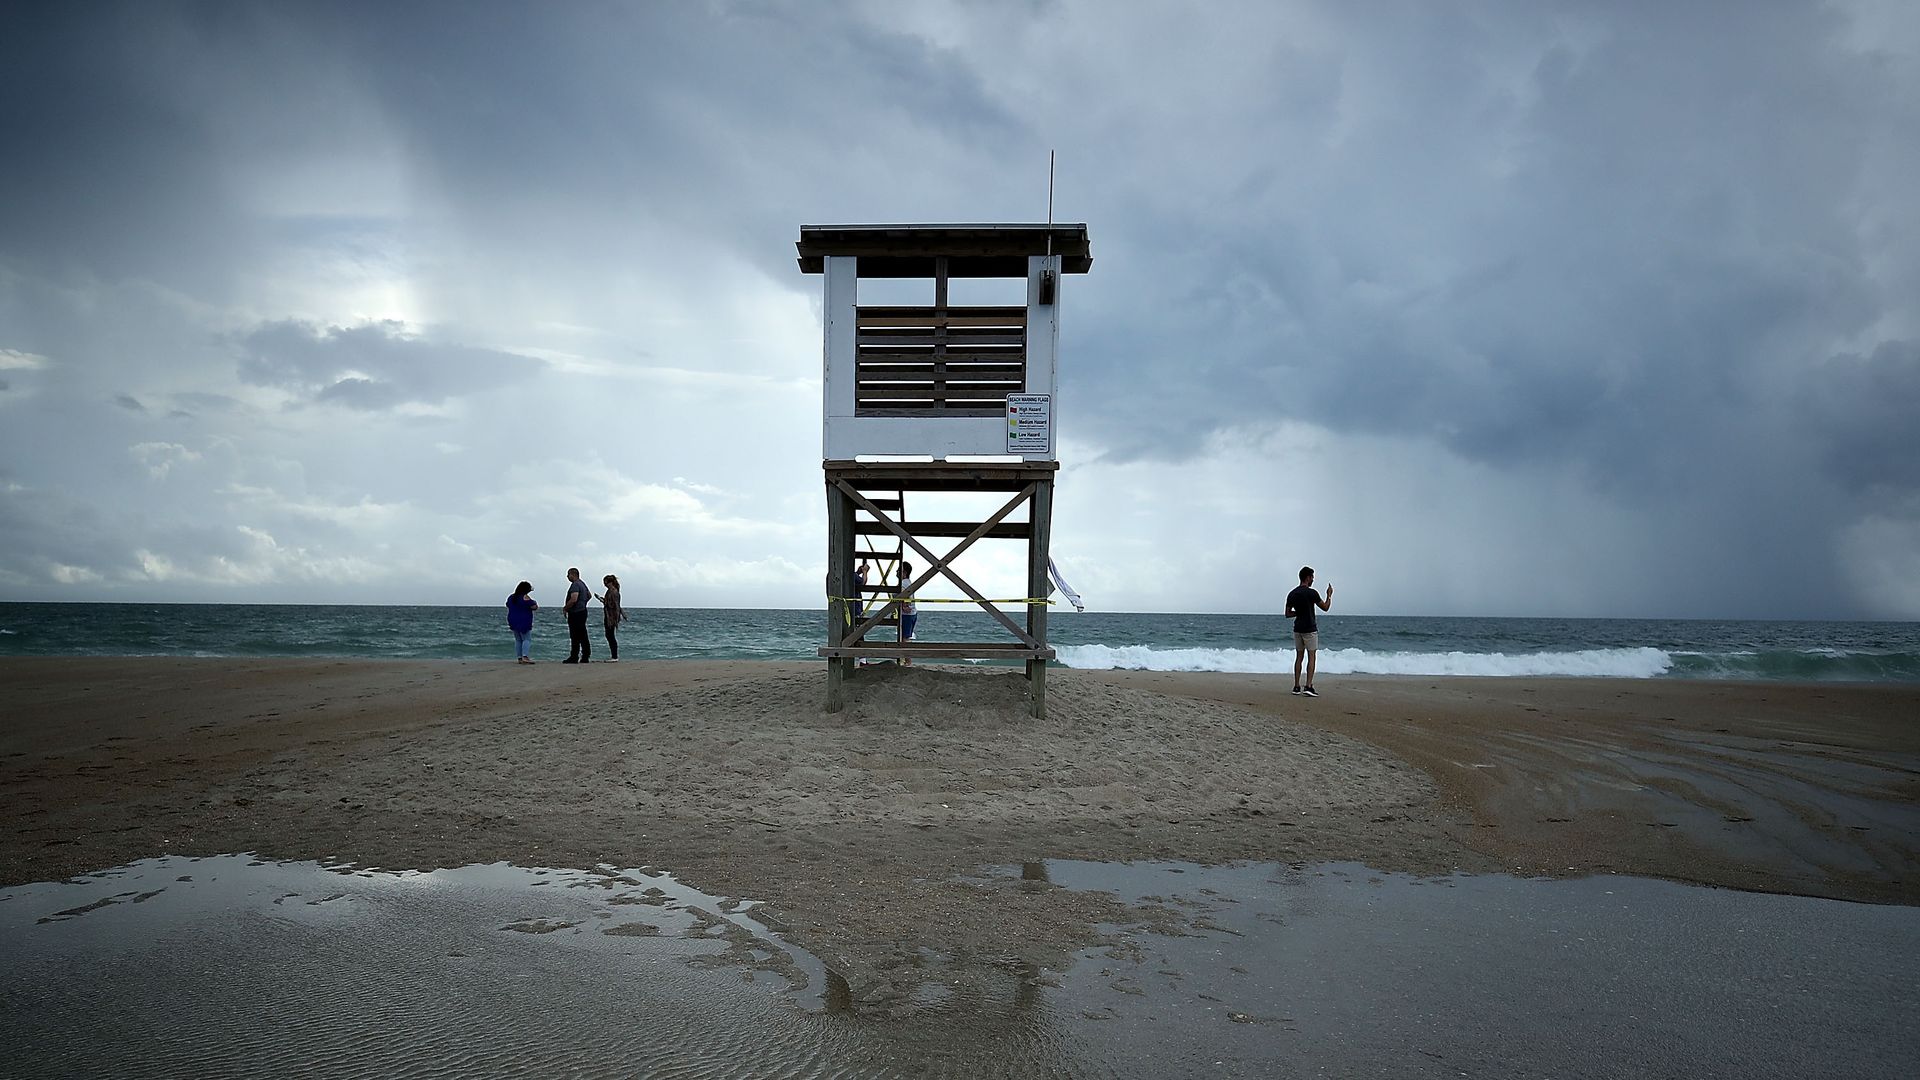 People stand near a lifeguard stand as Hurricane Florence approaches, on September 11, 2018 in Wrightsville Beach, North Carolina.